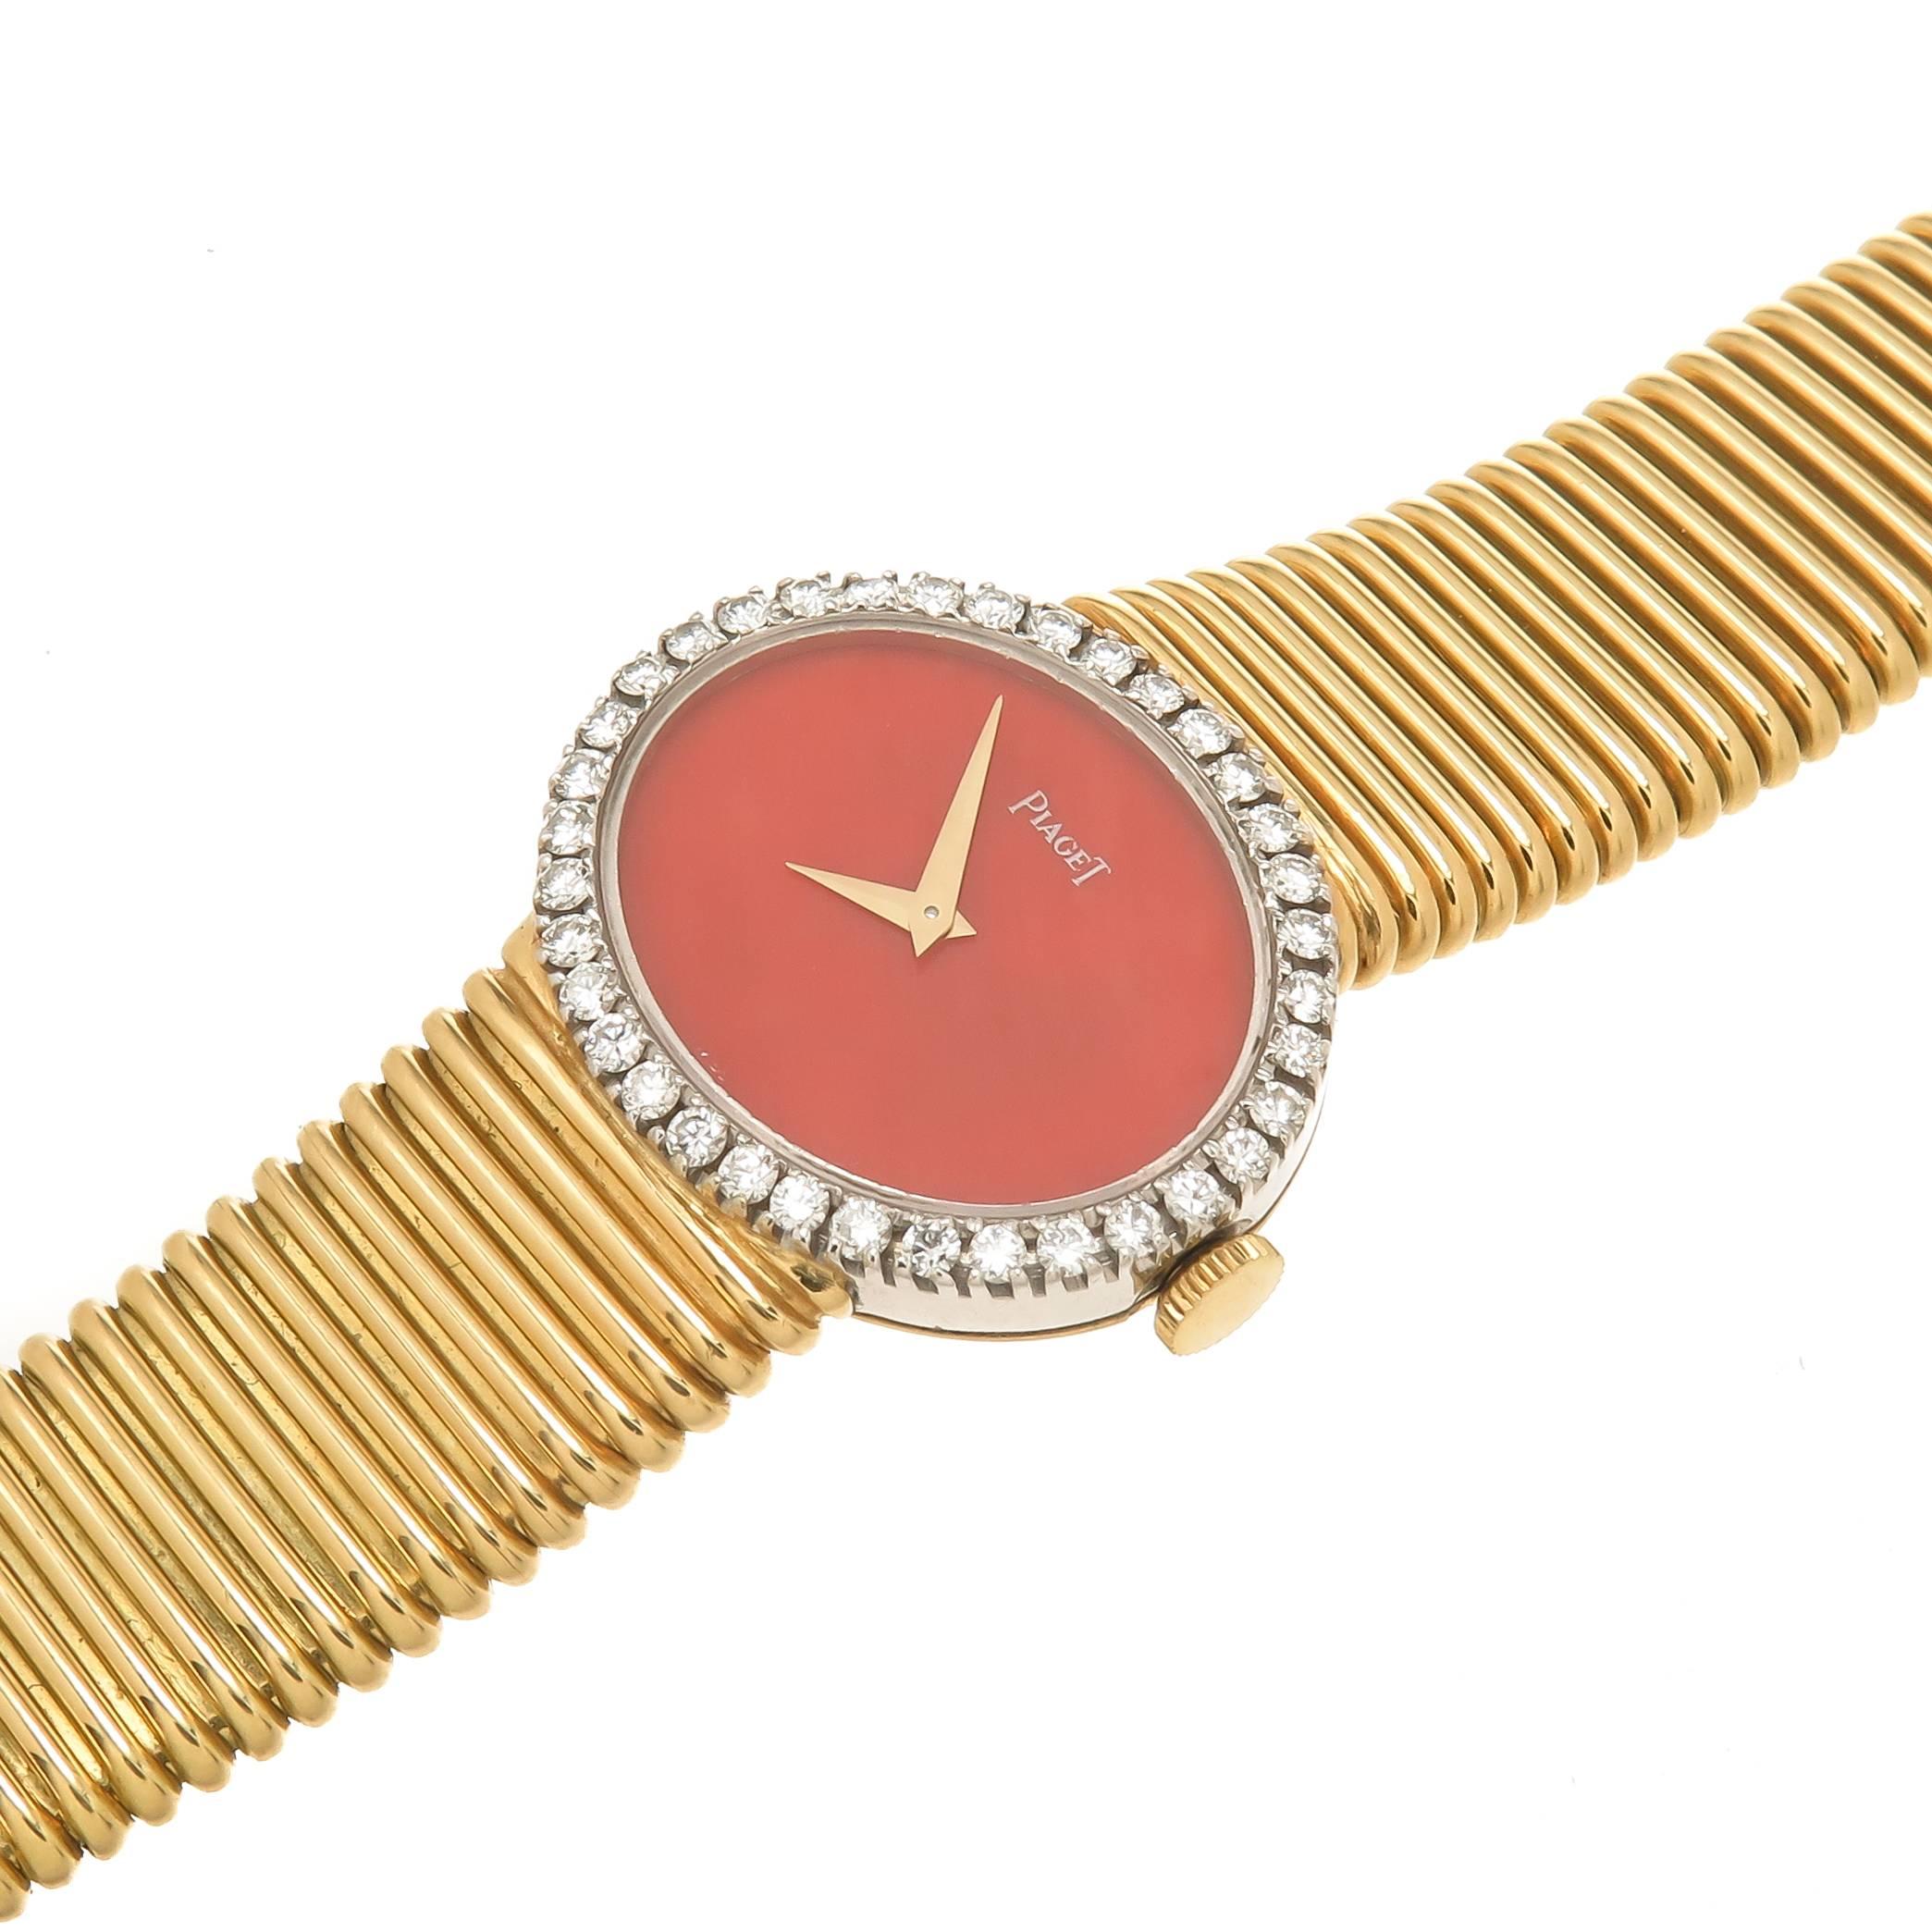 Circa 1970 Piaget 18K Yellow Gold Ladies Wrist Watch measuring 1 inch X 7/8 inch and attached to a flexible Bracelet measuring 5/8 inch wide, total length of watch 6 5/8 inch. 17 Jewel Manual wind Movement, Coral Dial and a bezel set with 36 Round